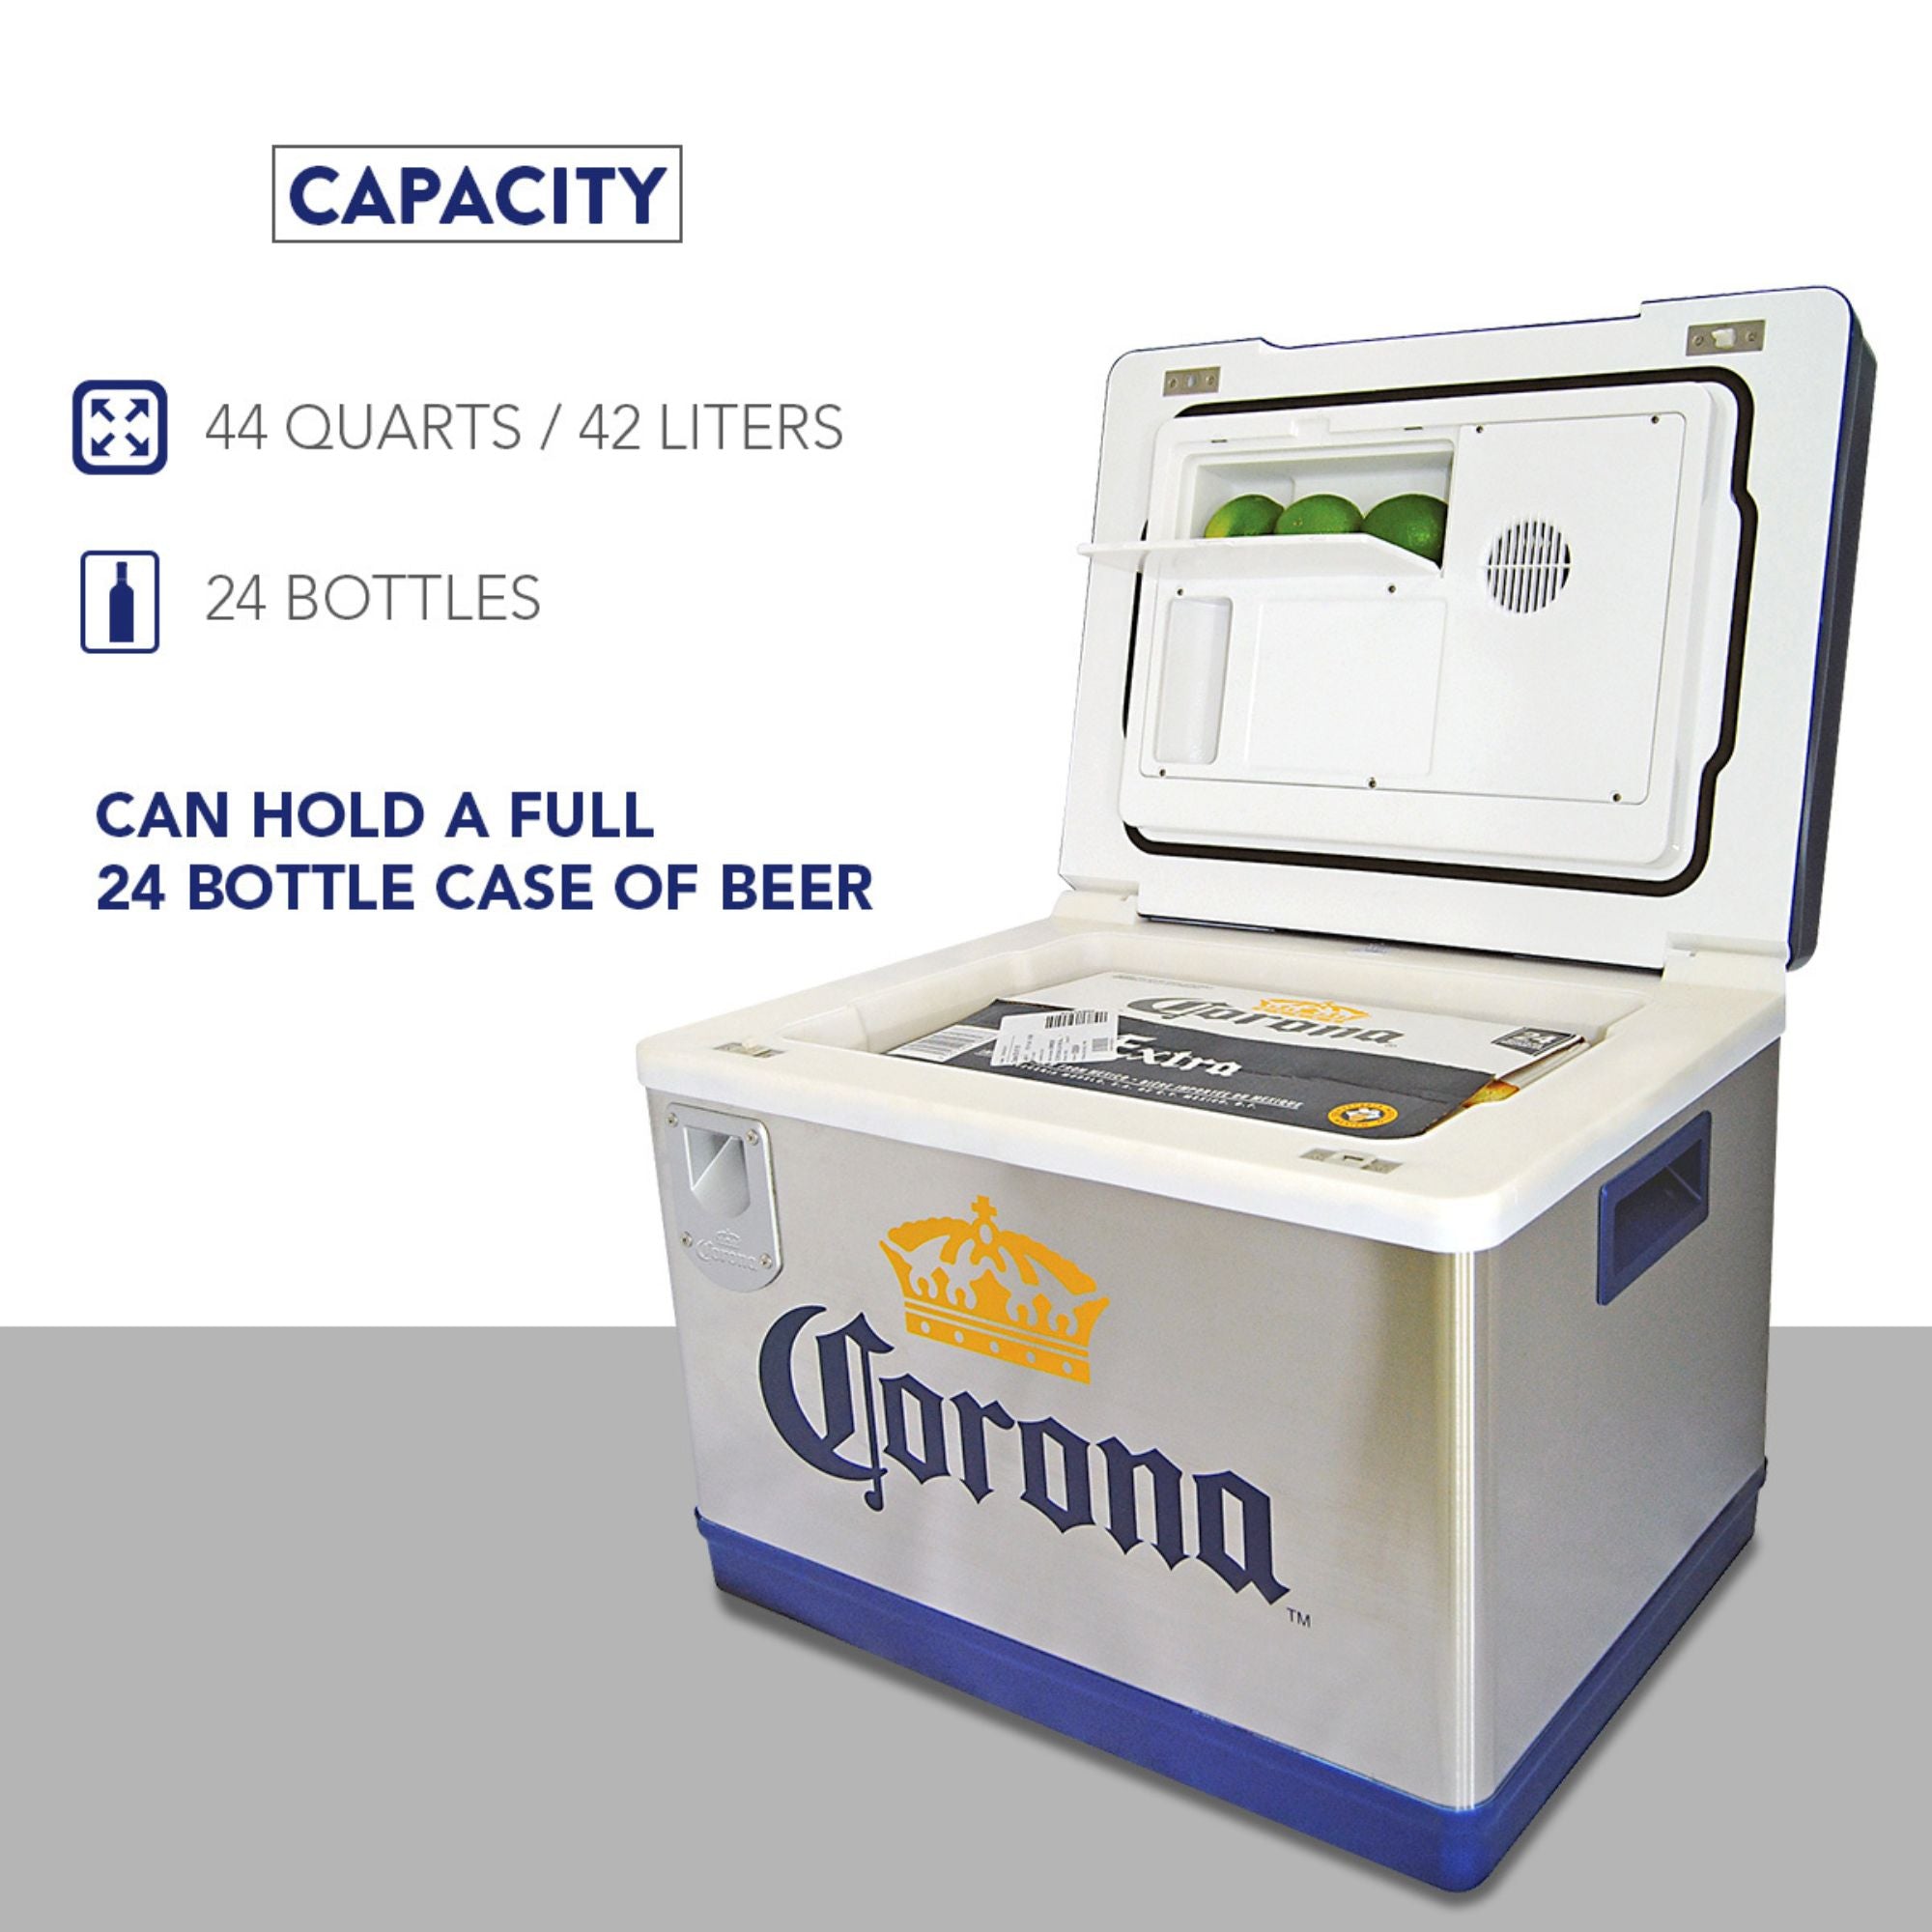 Product shot of the Corona Cruiser thermoelectric travel fridge, open with a case of beer inside and three limes visible in the lime storage compartment, on a white and light gray background. Text reads, "Capacity 44 quarts/42 liters; 24 bottles; Can hold a full 24 bottle case of beer"